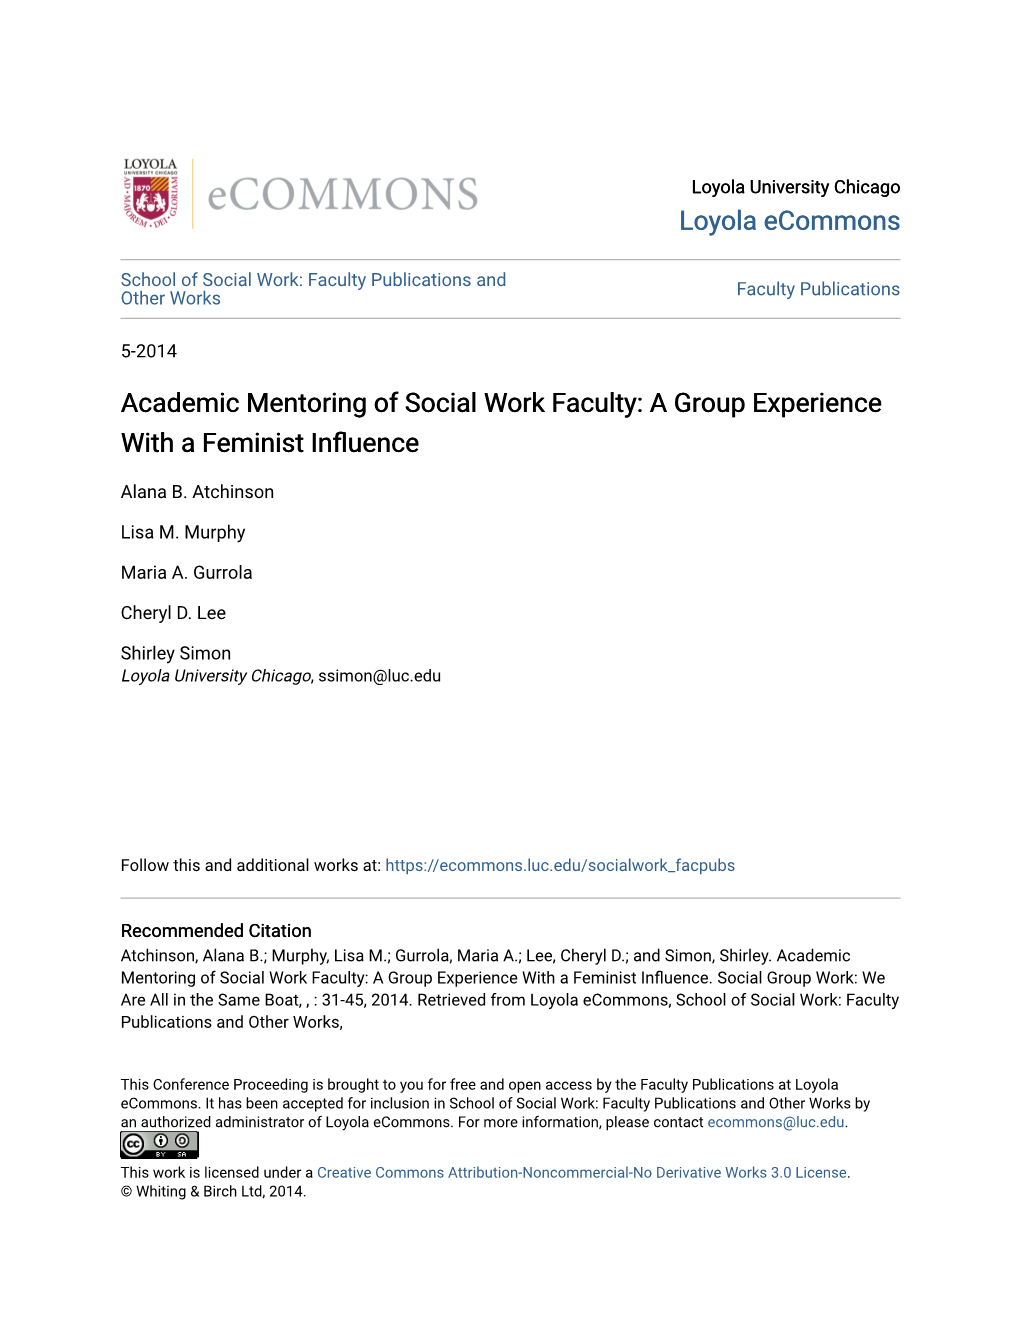 Academic Mentoring of Social Work Faculty: a Group Experience with a Feminist Influence